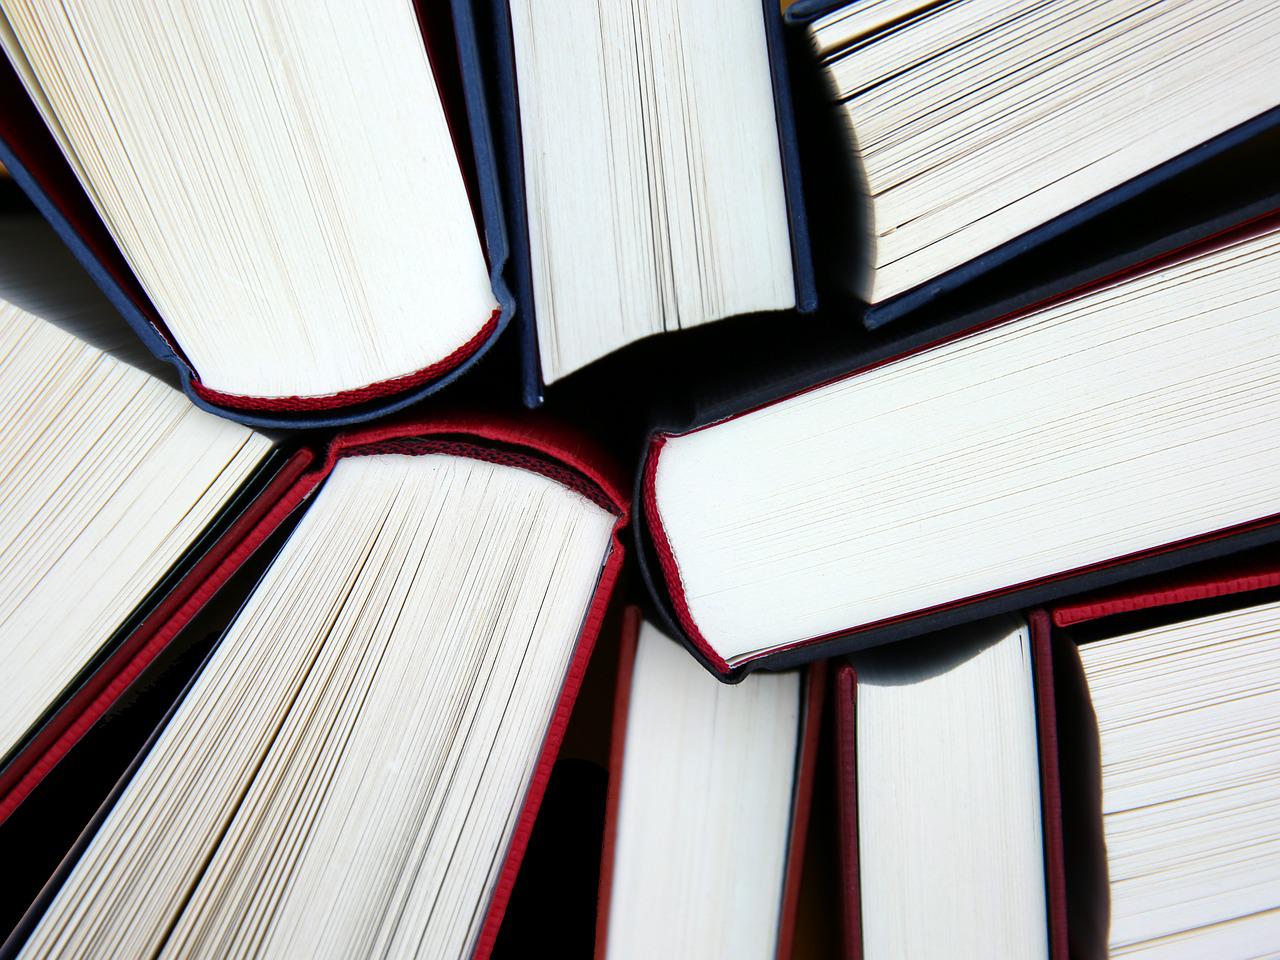 Image of books from Pixabay